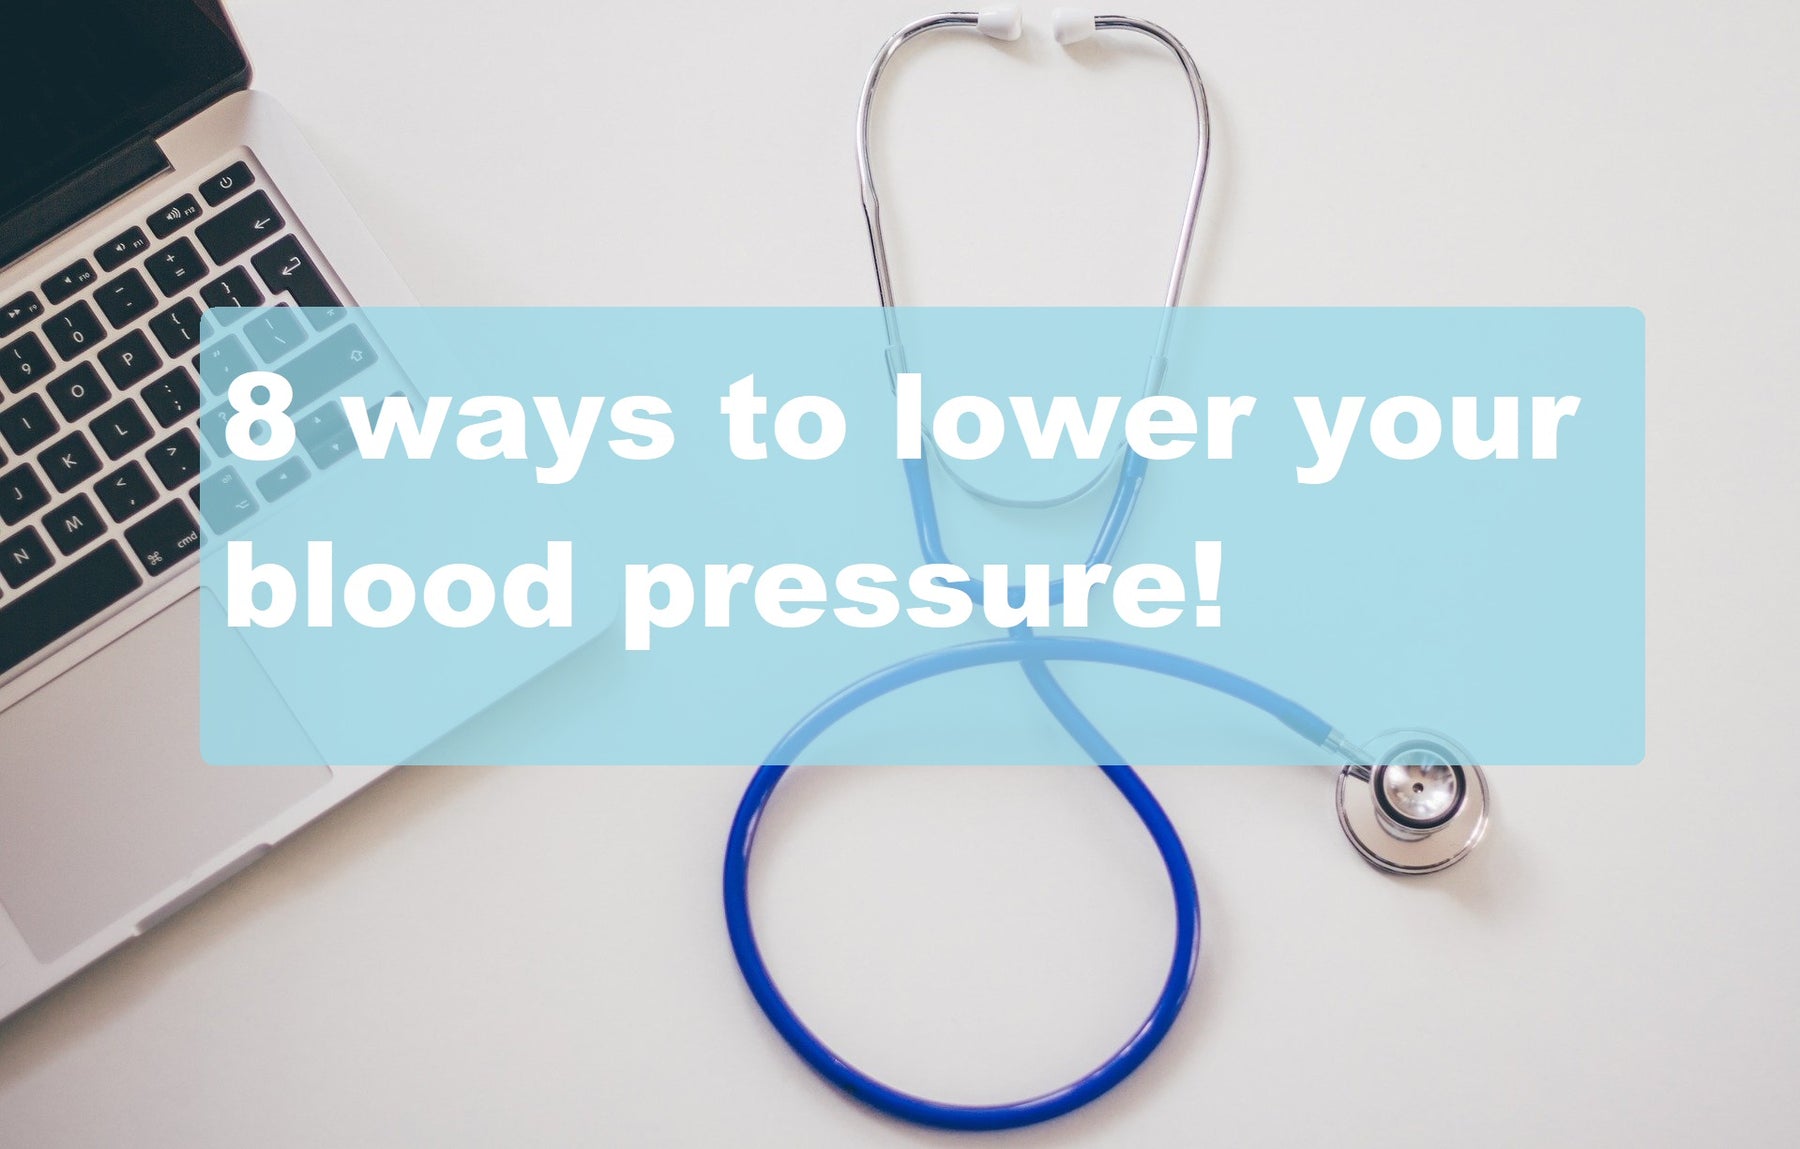 8 beneficial ways that can help lower blood pressure